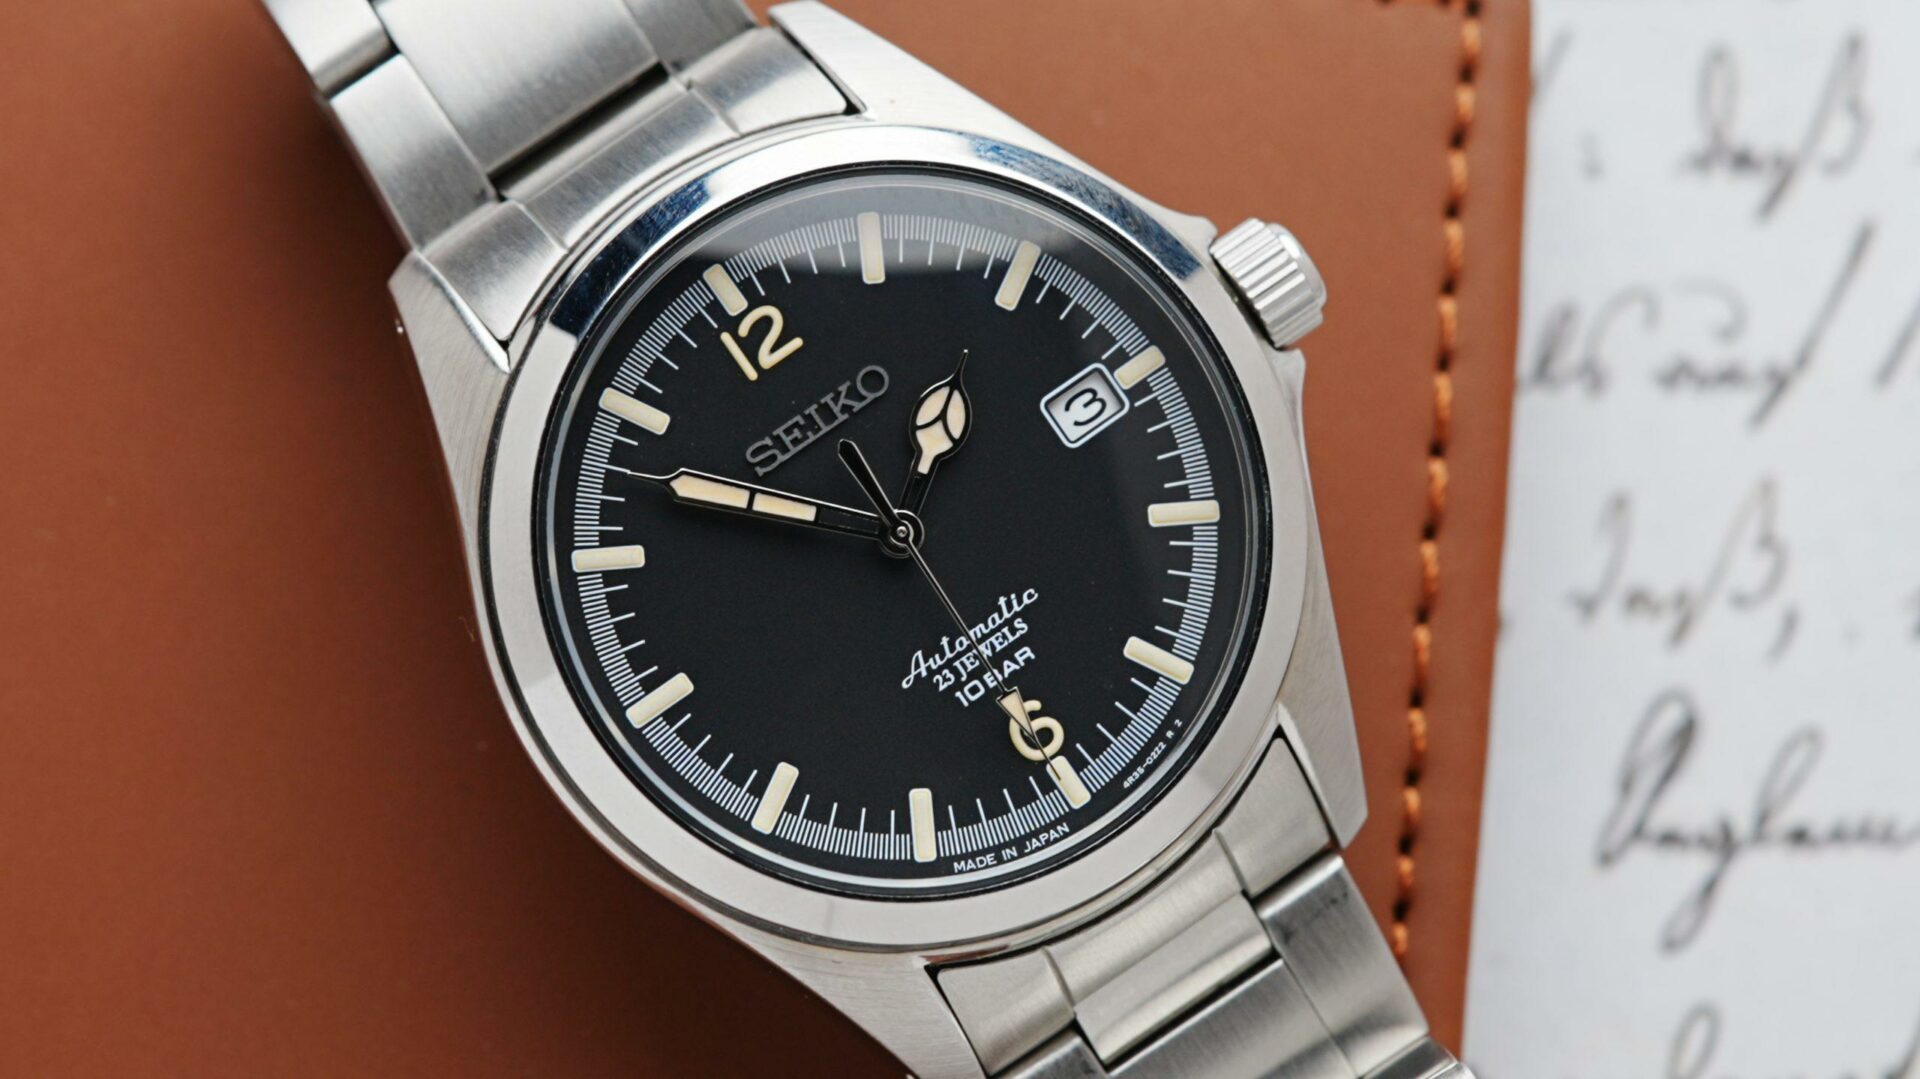 Seiko Explorer 1016 Limited Edition zoomed in.